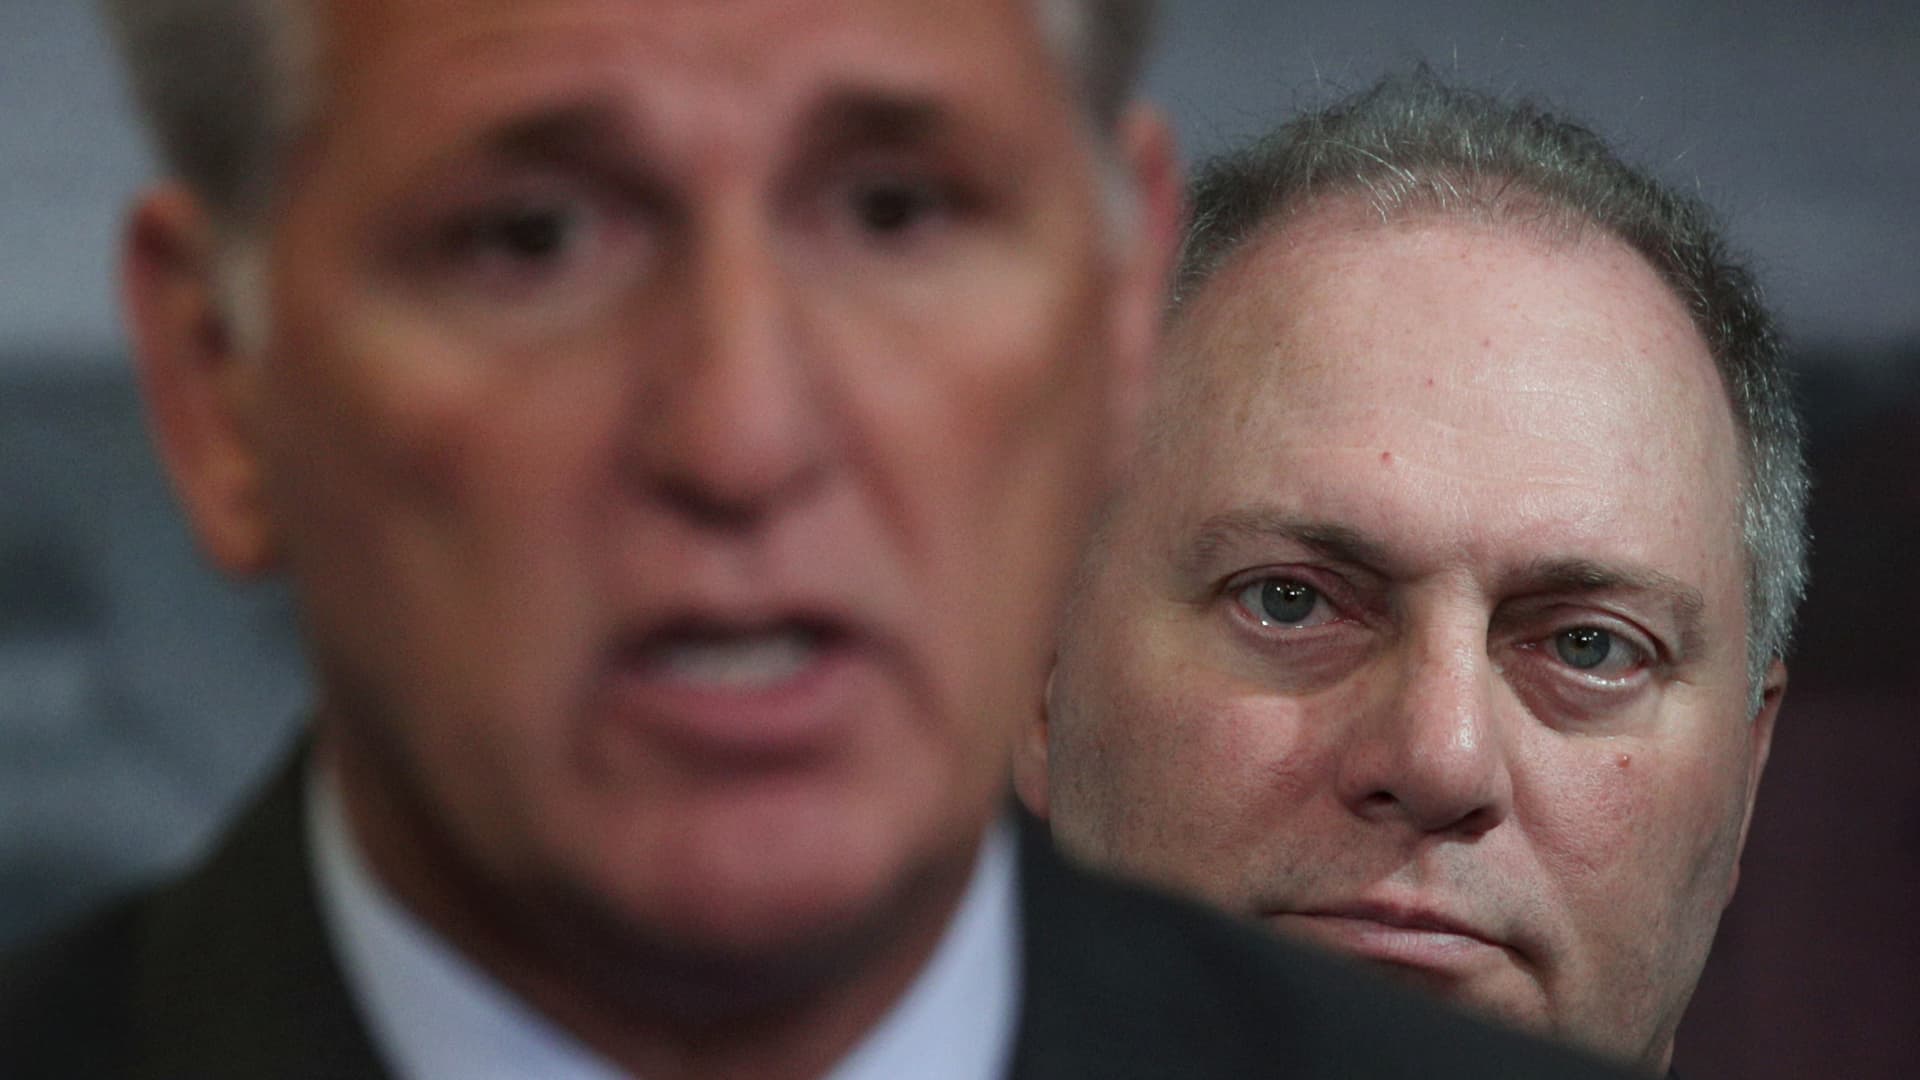 U.S. House Minority Leader Rep. Kevin McCarthy (R-CA) speaks as House Minority Whip Rep. Steve Scalise (R-LA) listens during a news conference at the U.S. Capitol September 25, 2019 in Washington, DC.